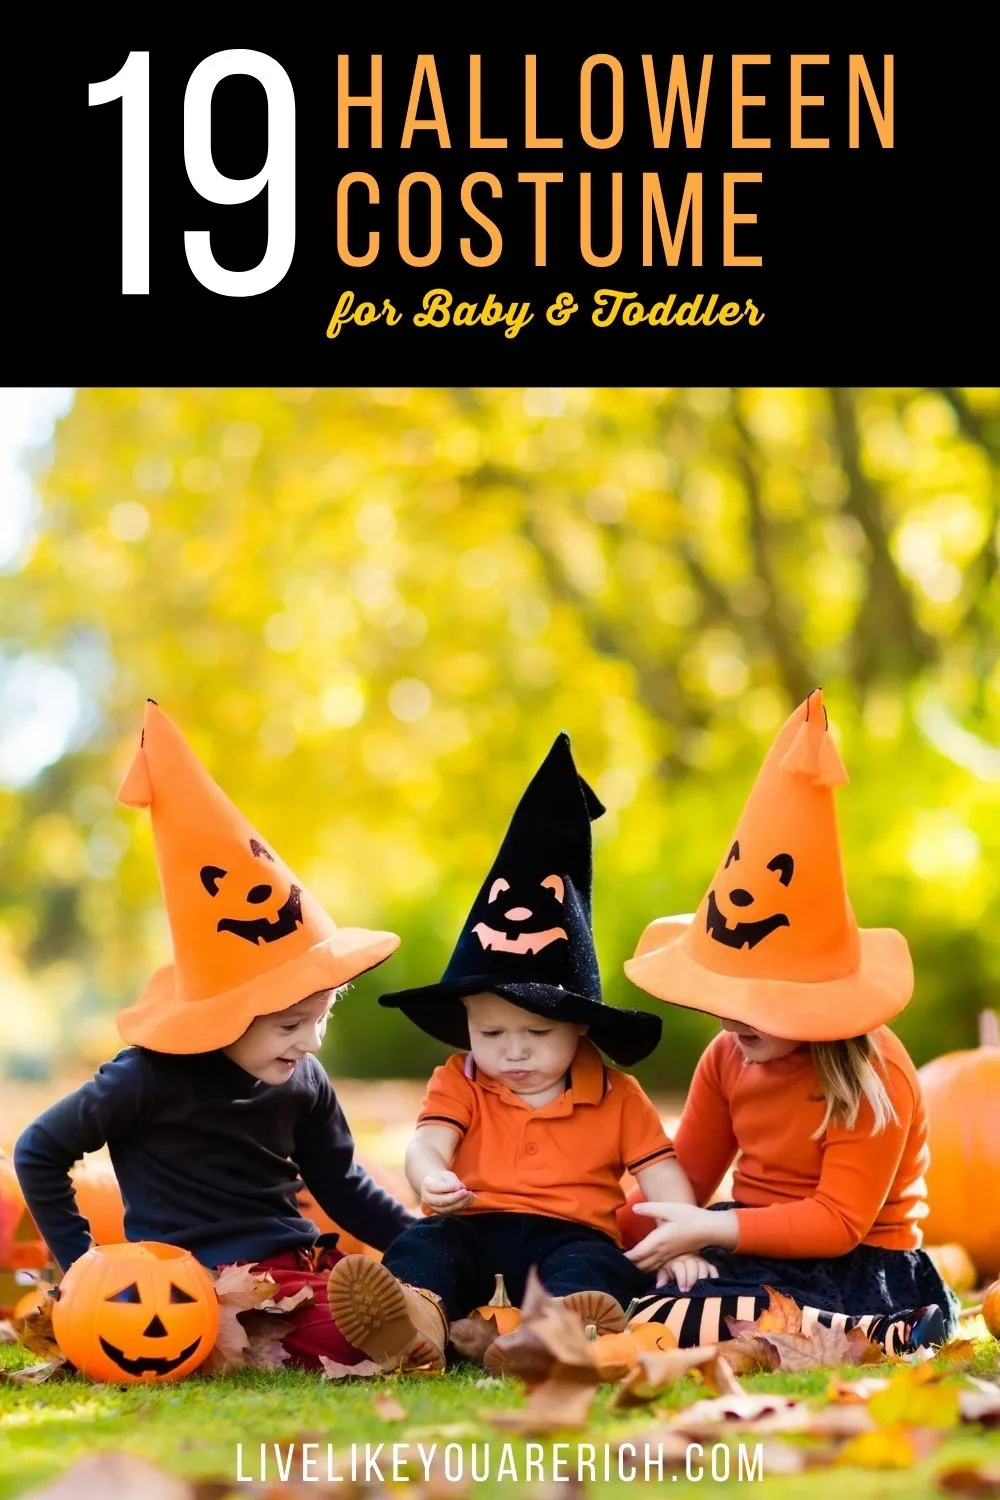 I love dressing my kids up for Halloween. It is so much fun for me. I admit I begin thinking about ideas of what they should be months before Halloween. Here are 19 super darling and inexpensive homemade baby/toddler halloween costumes - most of them are fairly quick to put together too!